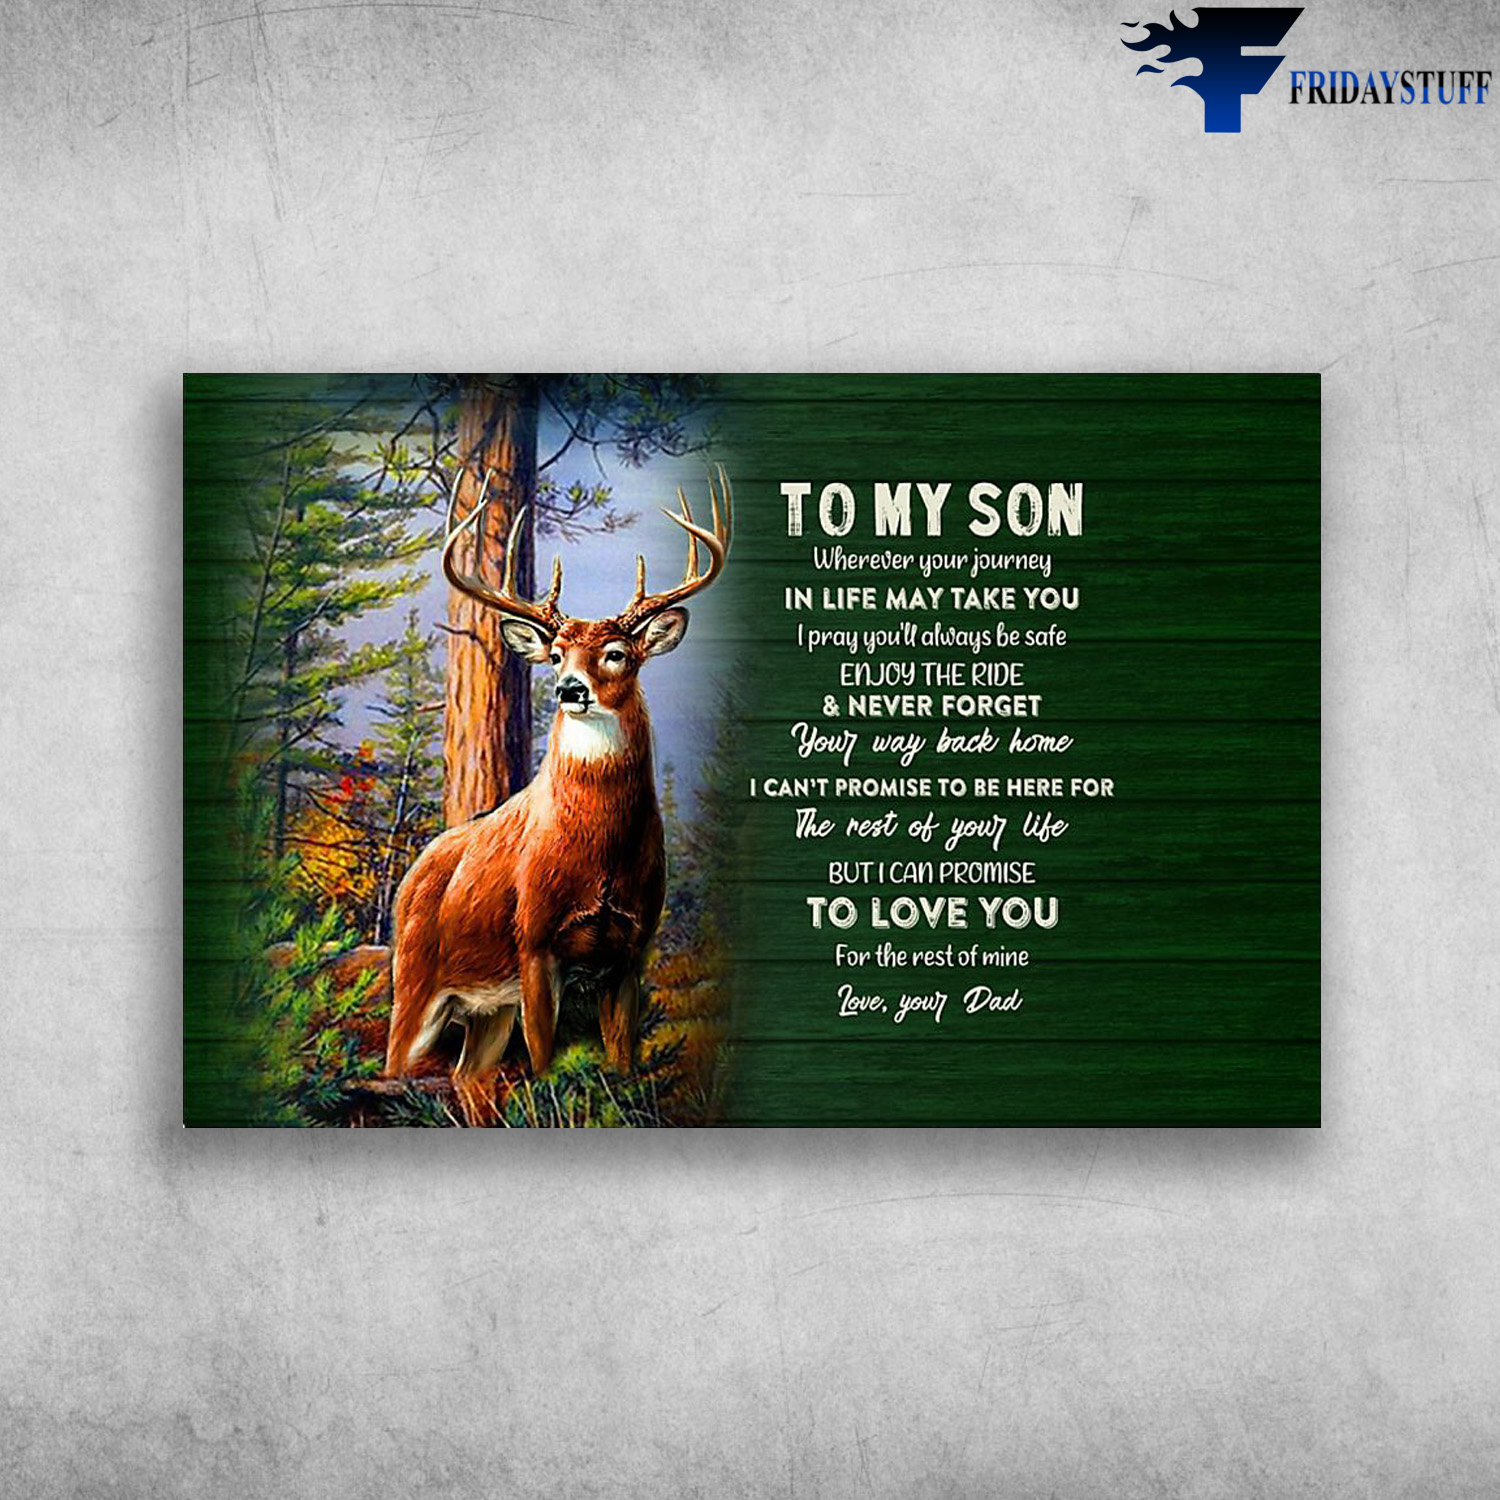 The Deer, Dad And Son - To My Son, Wherever Your Journey, In Life May Take You, I Pray You'll Always Be Safe, Enjoy The Ride, And Never Forget, Your Way Back Home, I Can't Promise To Be Here For The Rest Of Your Life